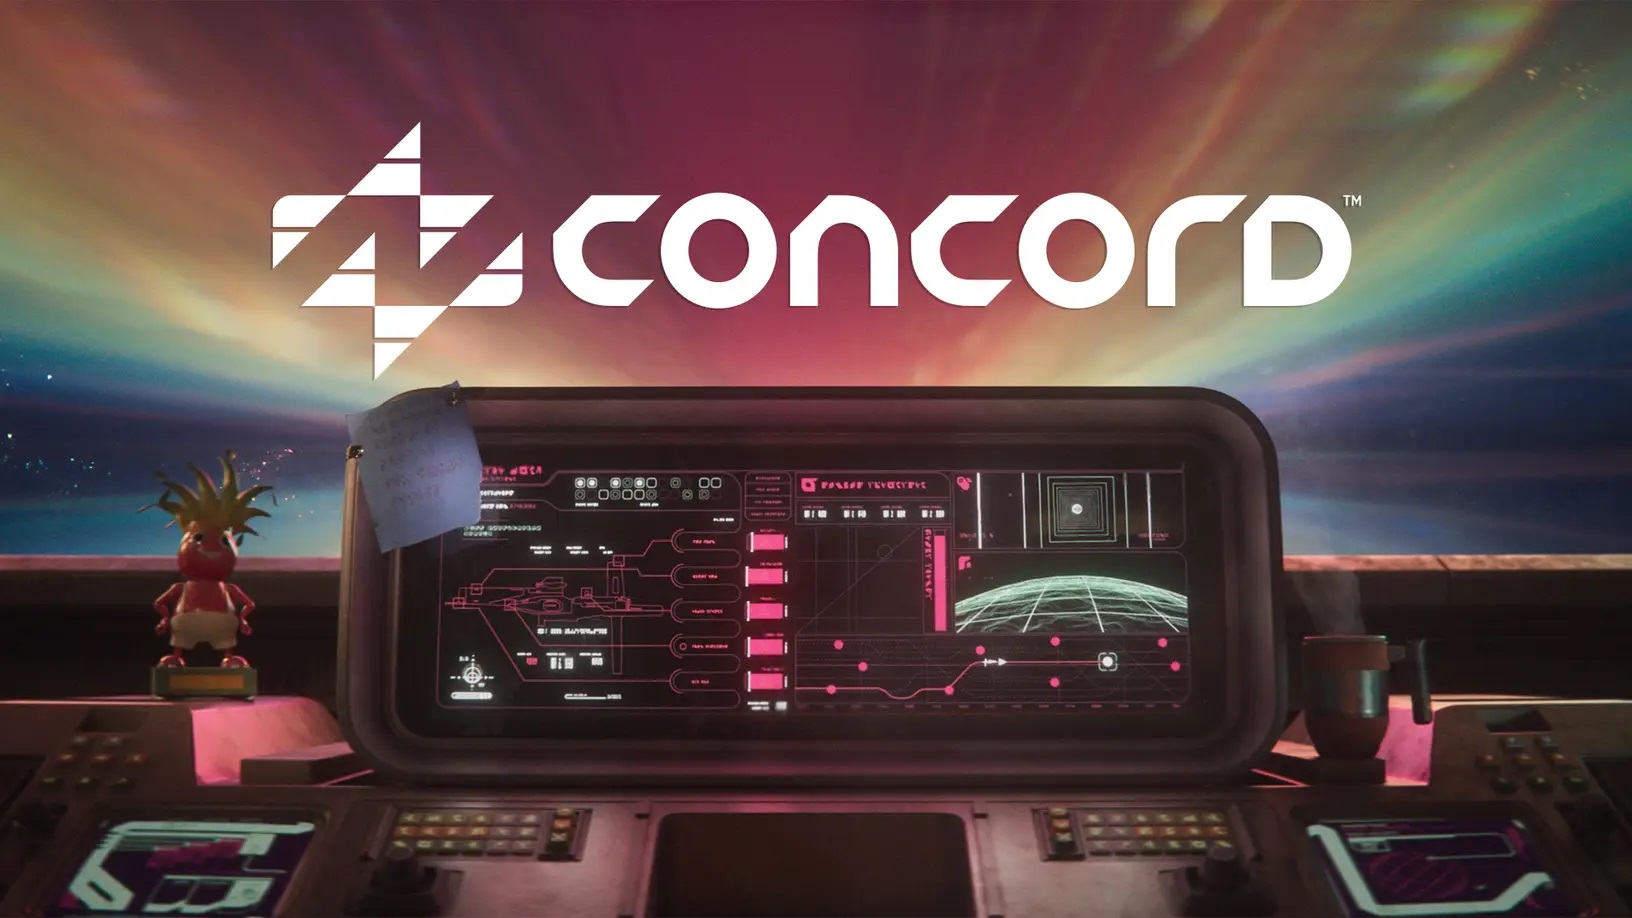 Sony teases imminent Concord multiplayer footage reveal